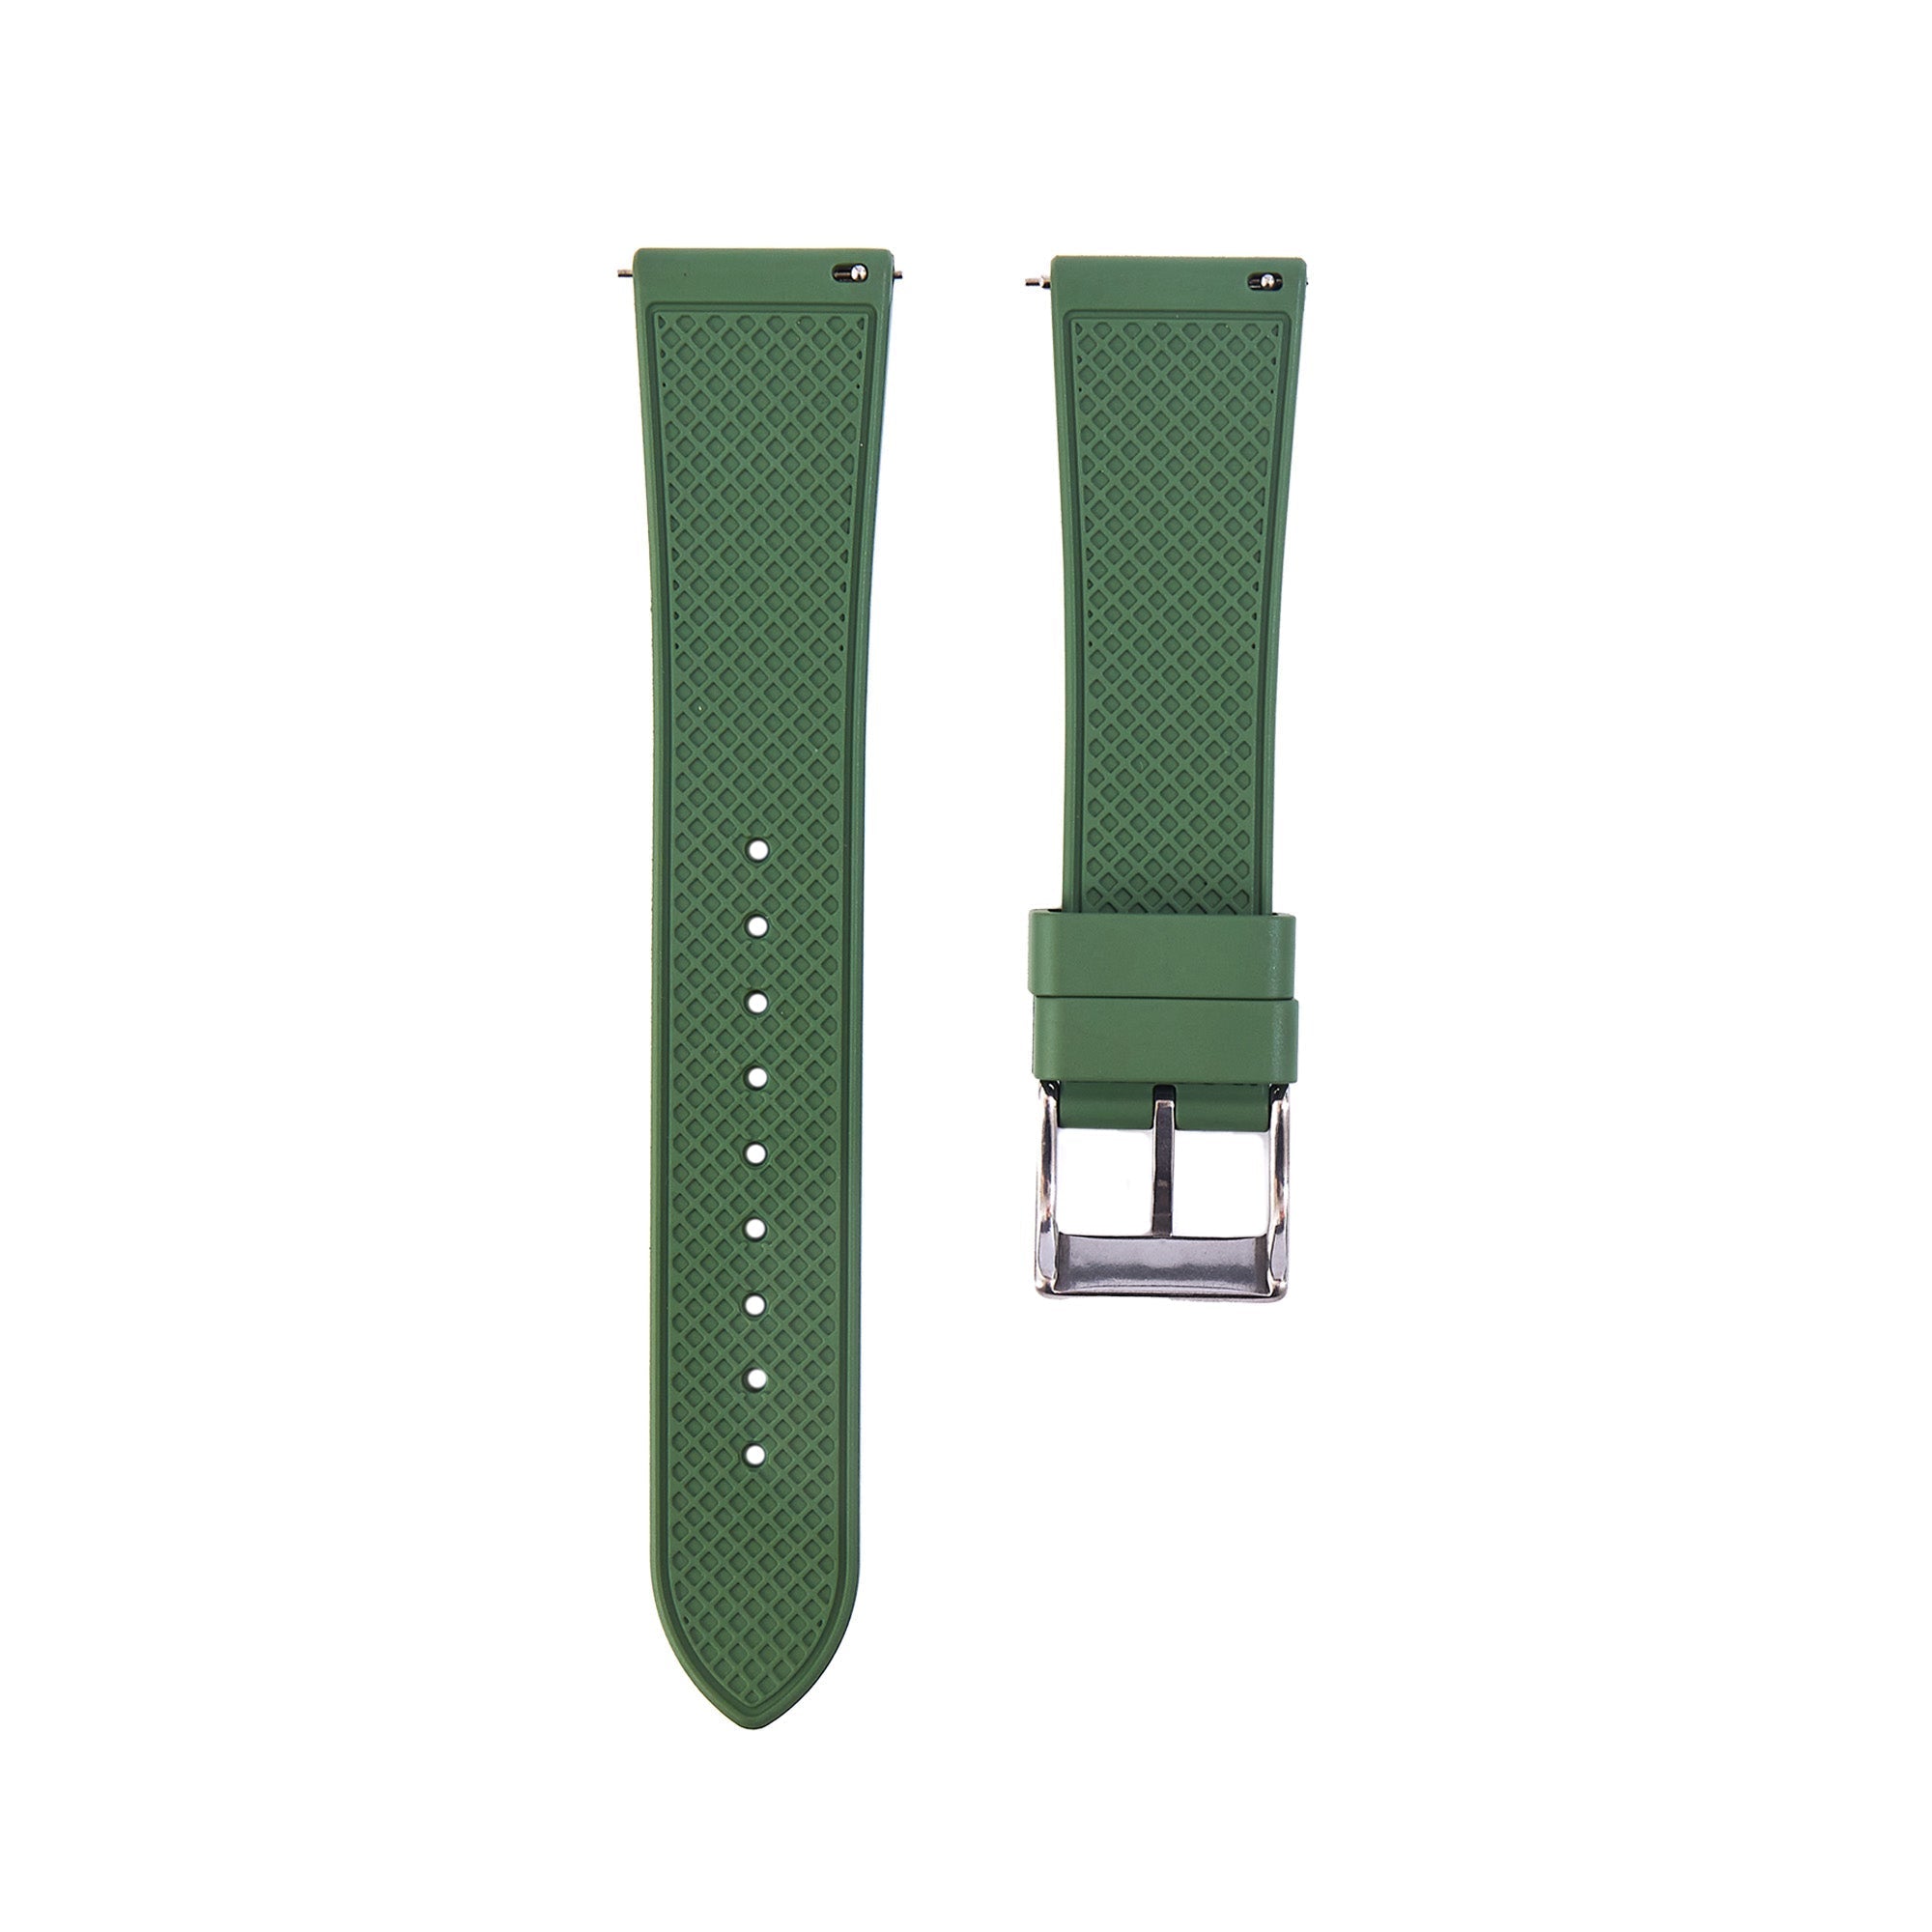 Grid FKM Rubber Strap - Quick-Release - Compatible with Blancpain x Swatch - Army Green (2412) -StrapSeeker